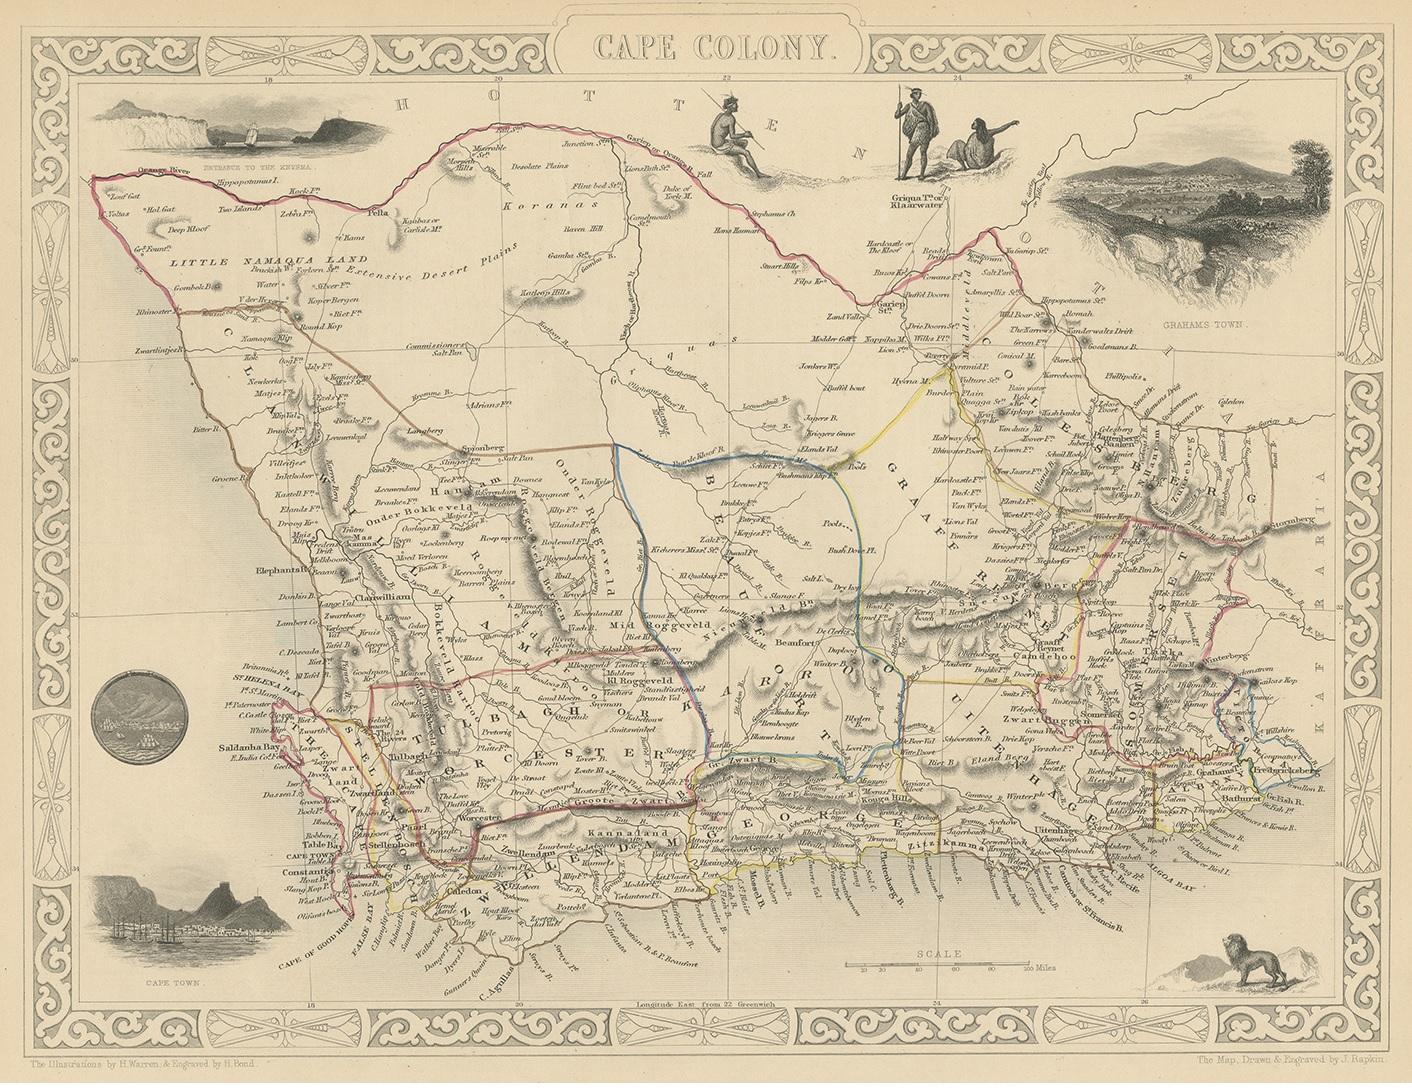 Antique map titled 'Cape Colony'. Decorative map of Cape Colony, South Africa. With vignettes of the entrance to the Knysna, Graham Town and Cape Town. This map originates from the 'Illustrated World Atlas'.